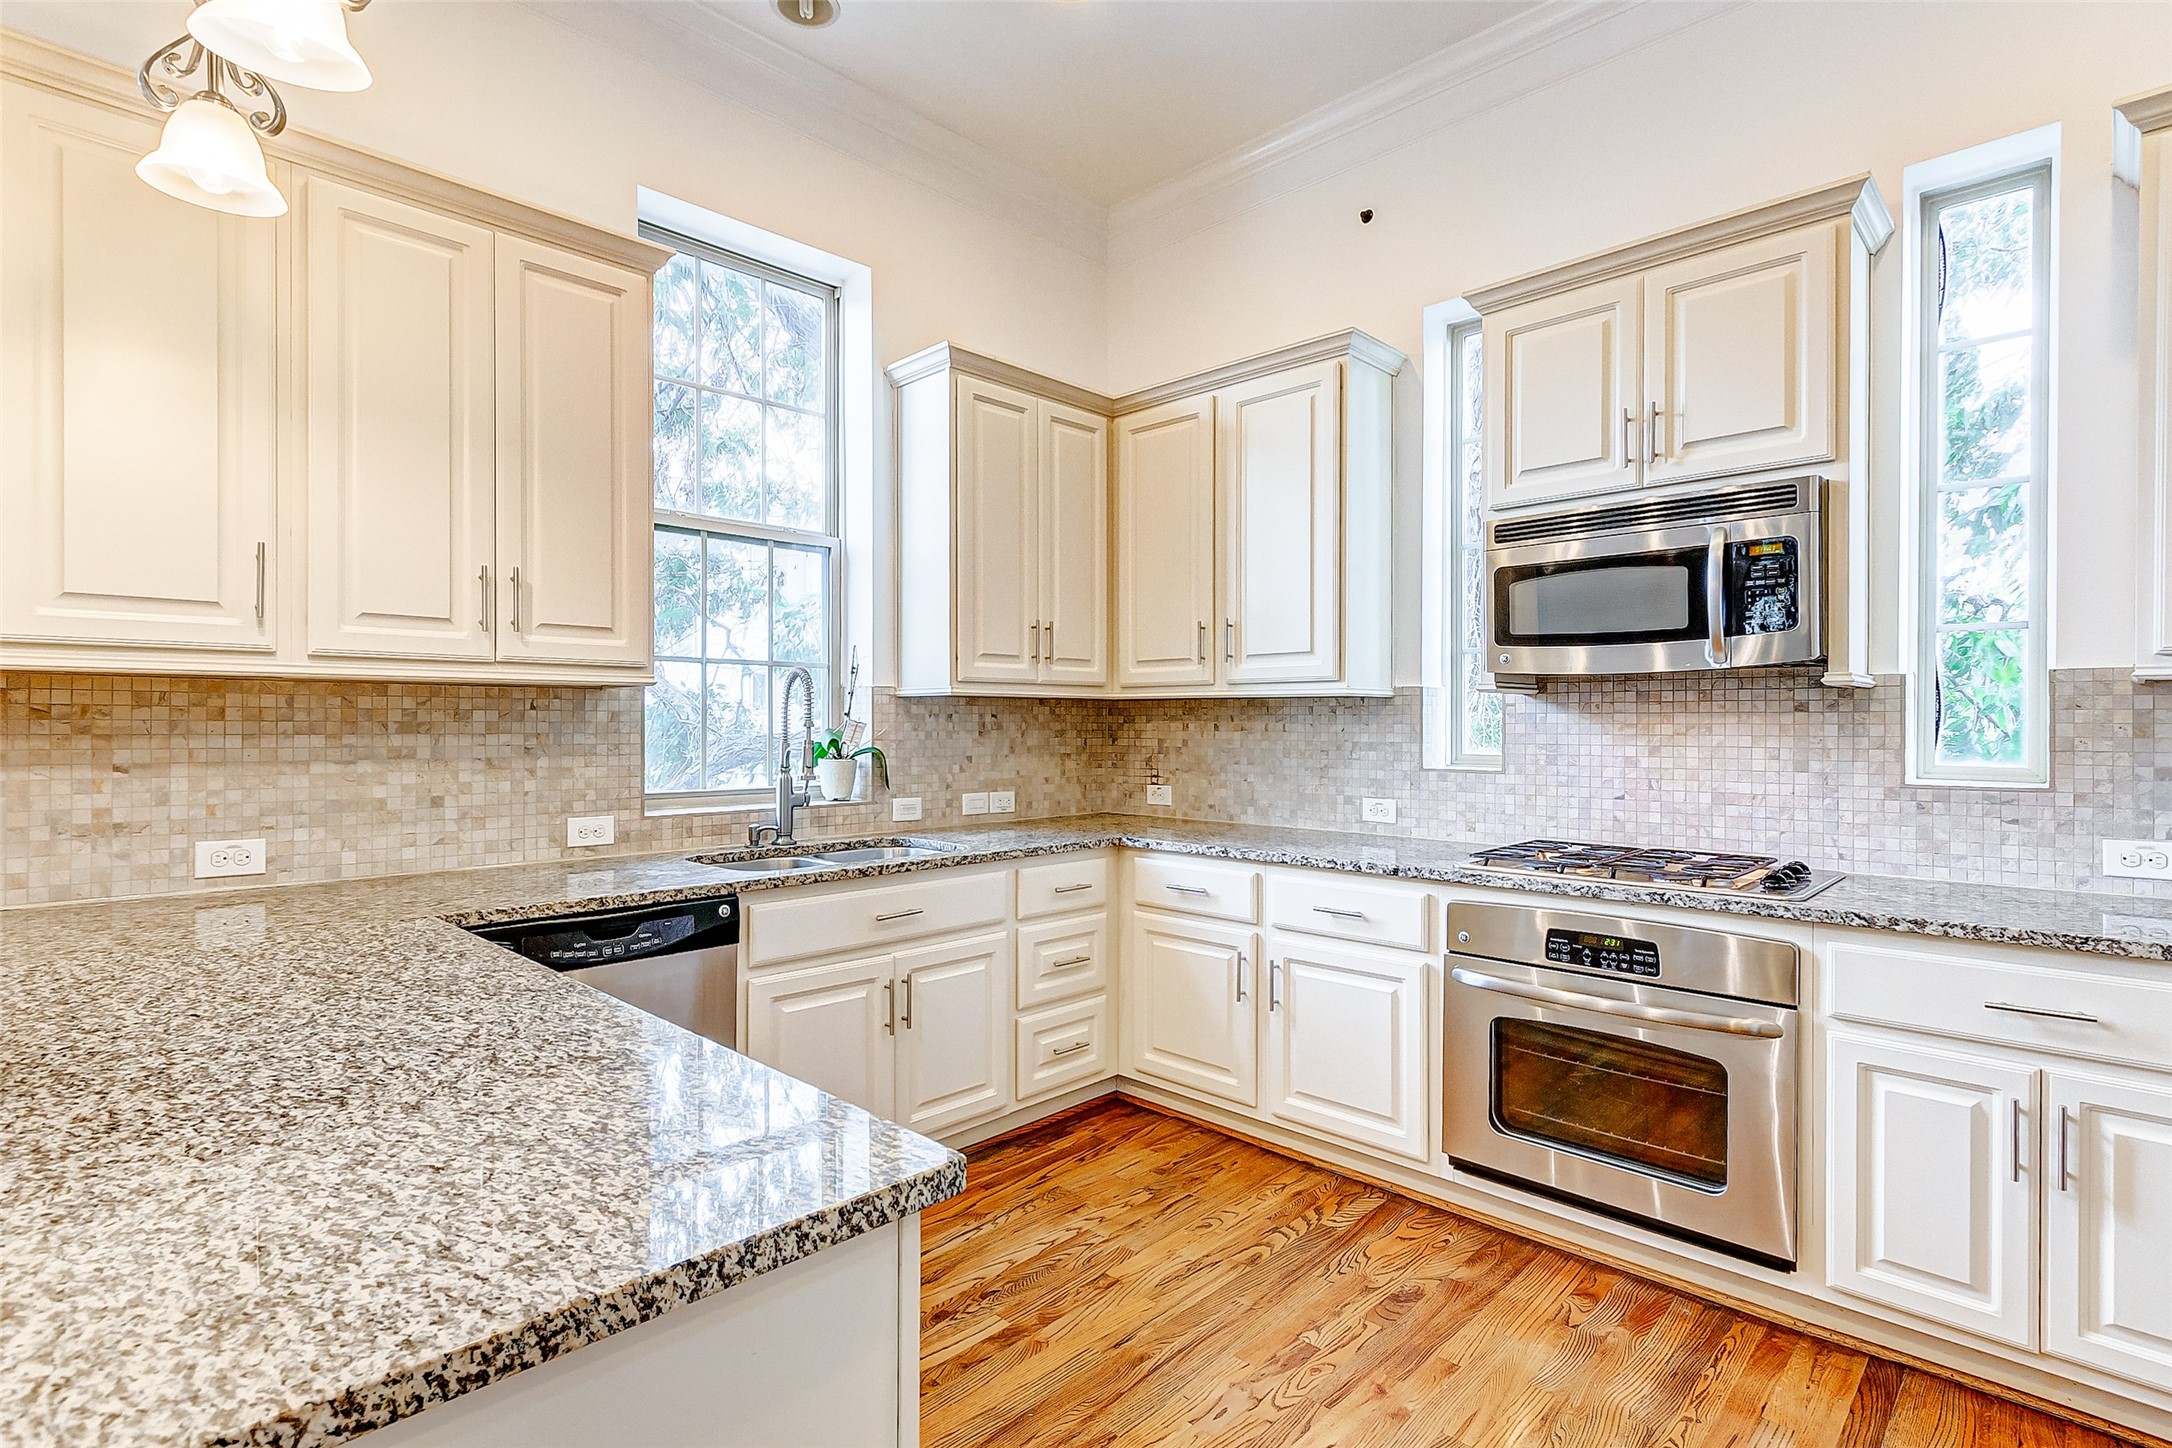 Welcome to your beautifully updated kitchen offering granite countertops paired with coordinating backsplash, stainless steel appliances, gorgeous wood flooring, and plentiful natural lighting!